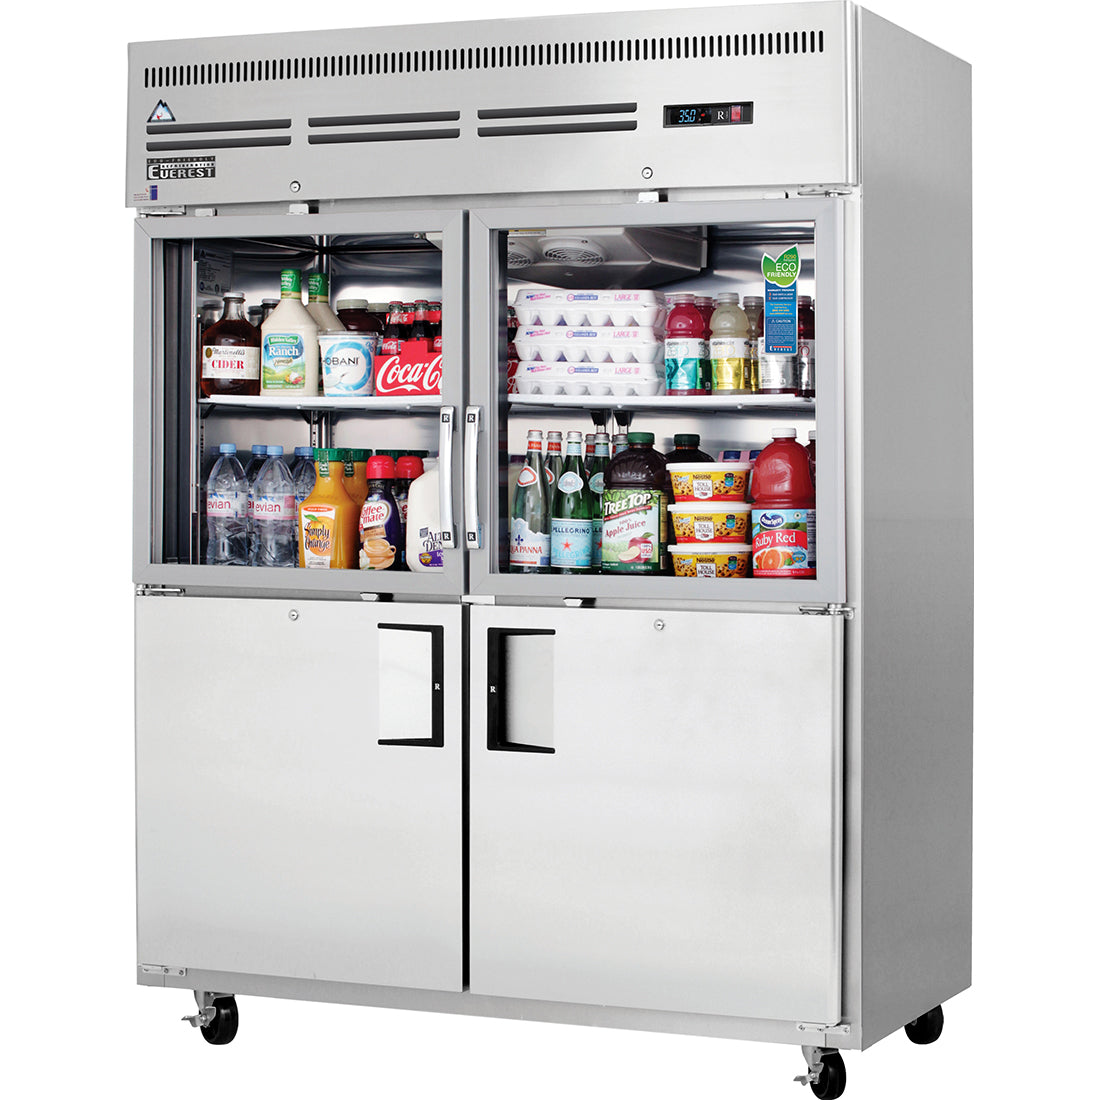 Everest ES Series-EGSWH4 Two Section Glass/Solid Half Door Upright Reach-In Refrigerator - 55 Cu. Ft.